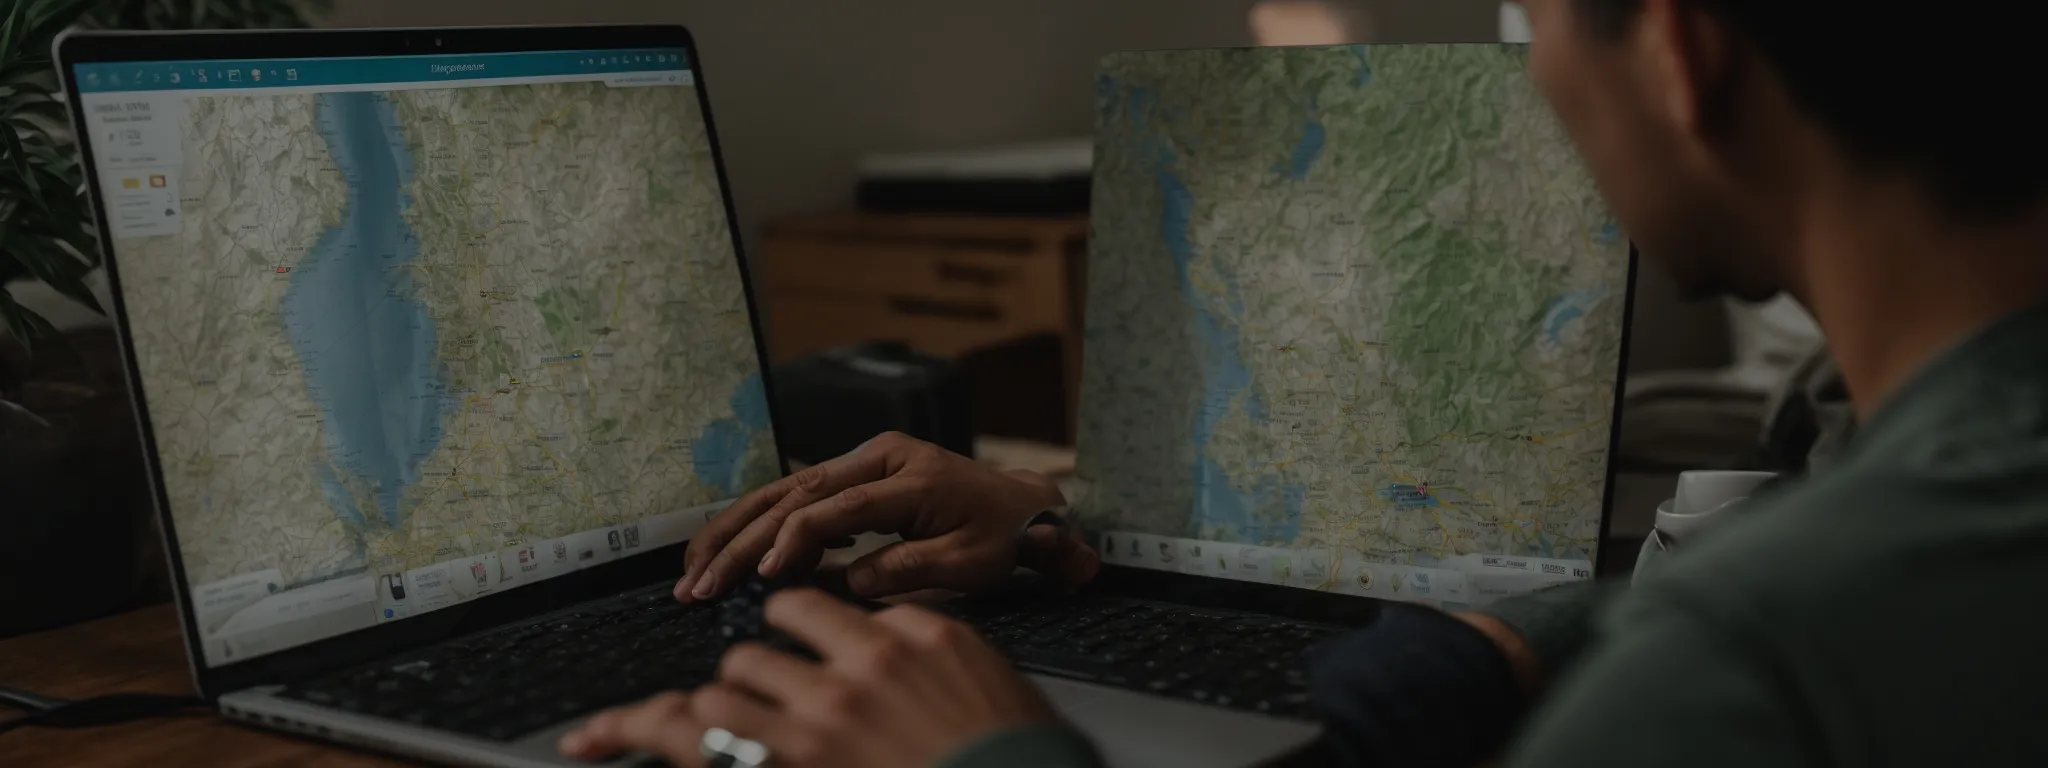 a user typing on a laptop with a map and location markers displayed on the screen.